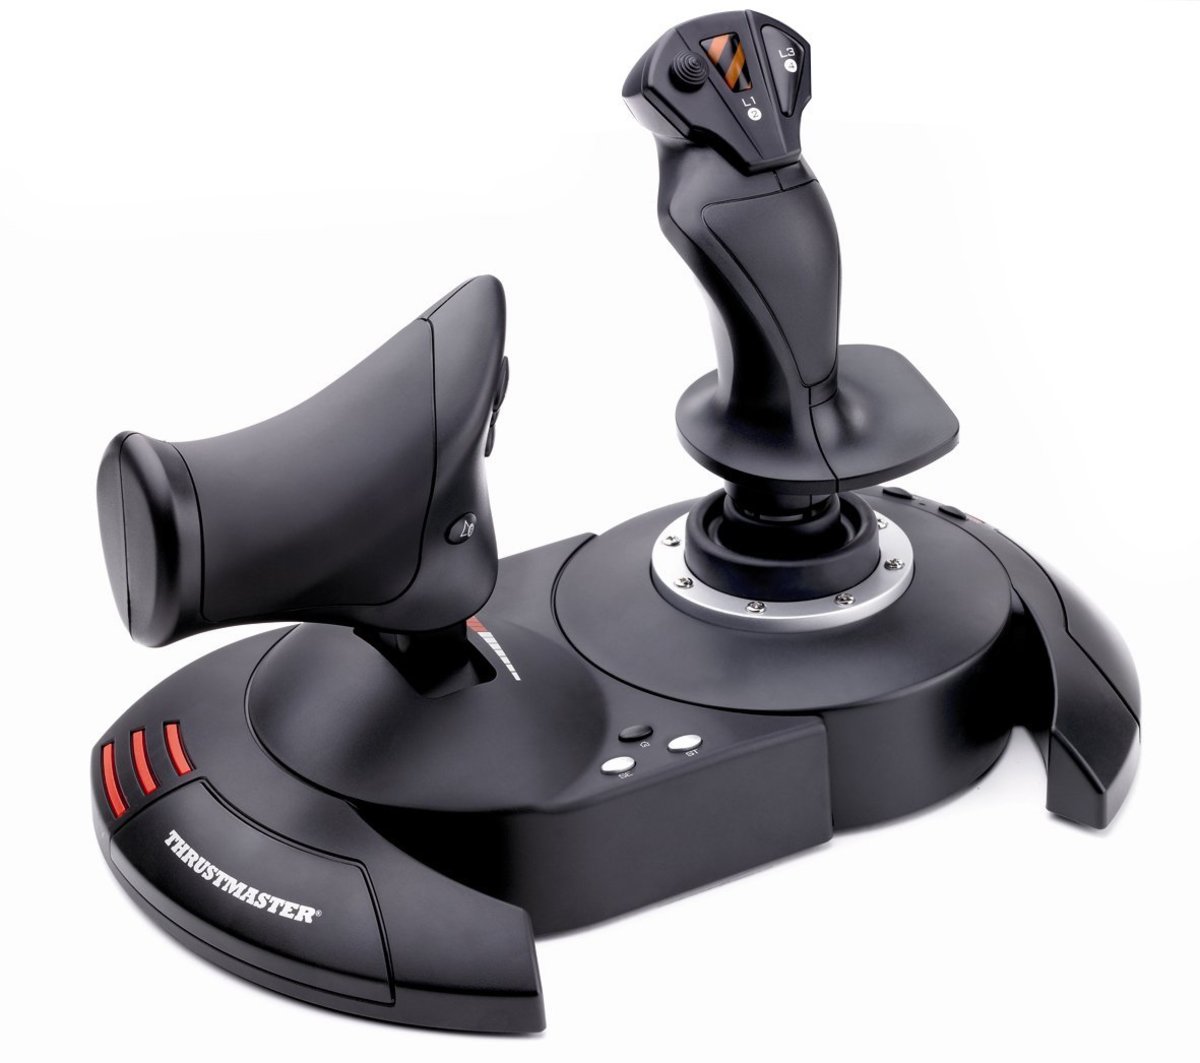 If you're looking for a budget gaming joystick, the Thrustmaster T-Flight is a decent option. Find more of our favorites below. 